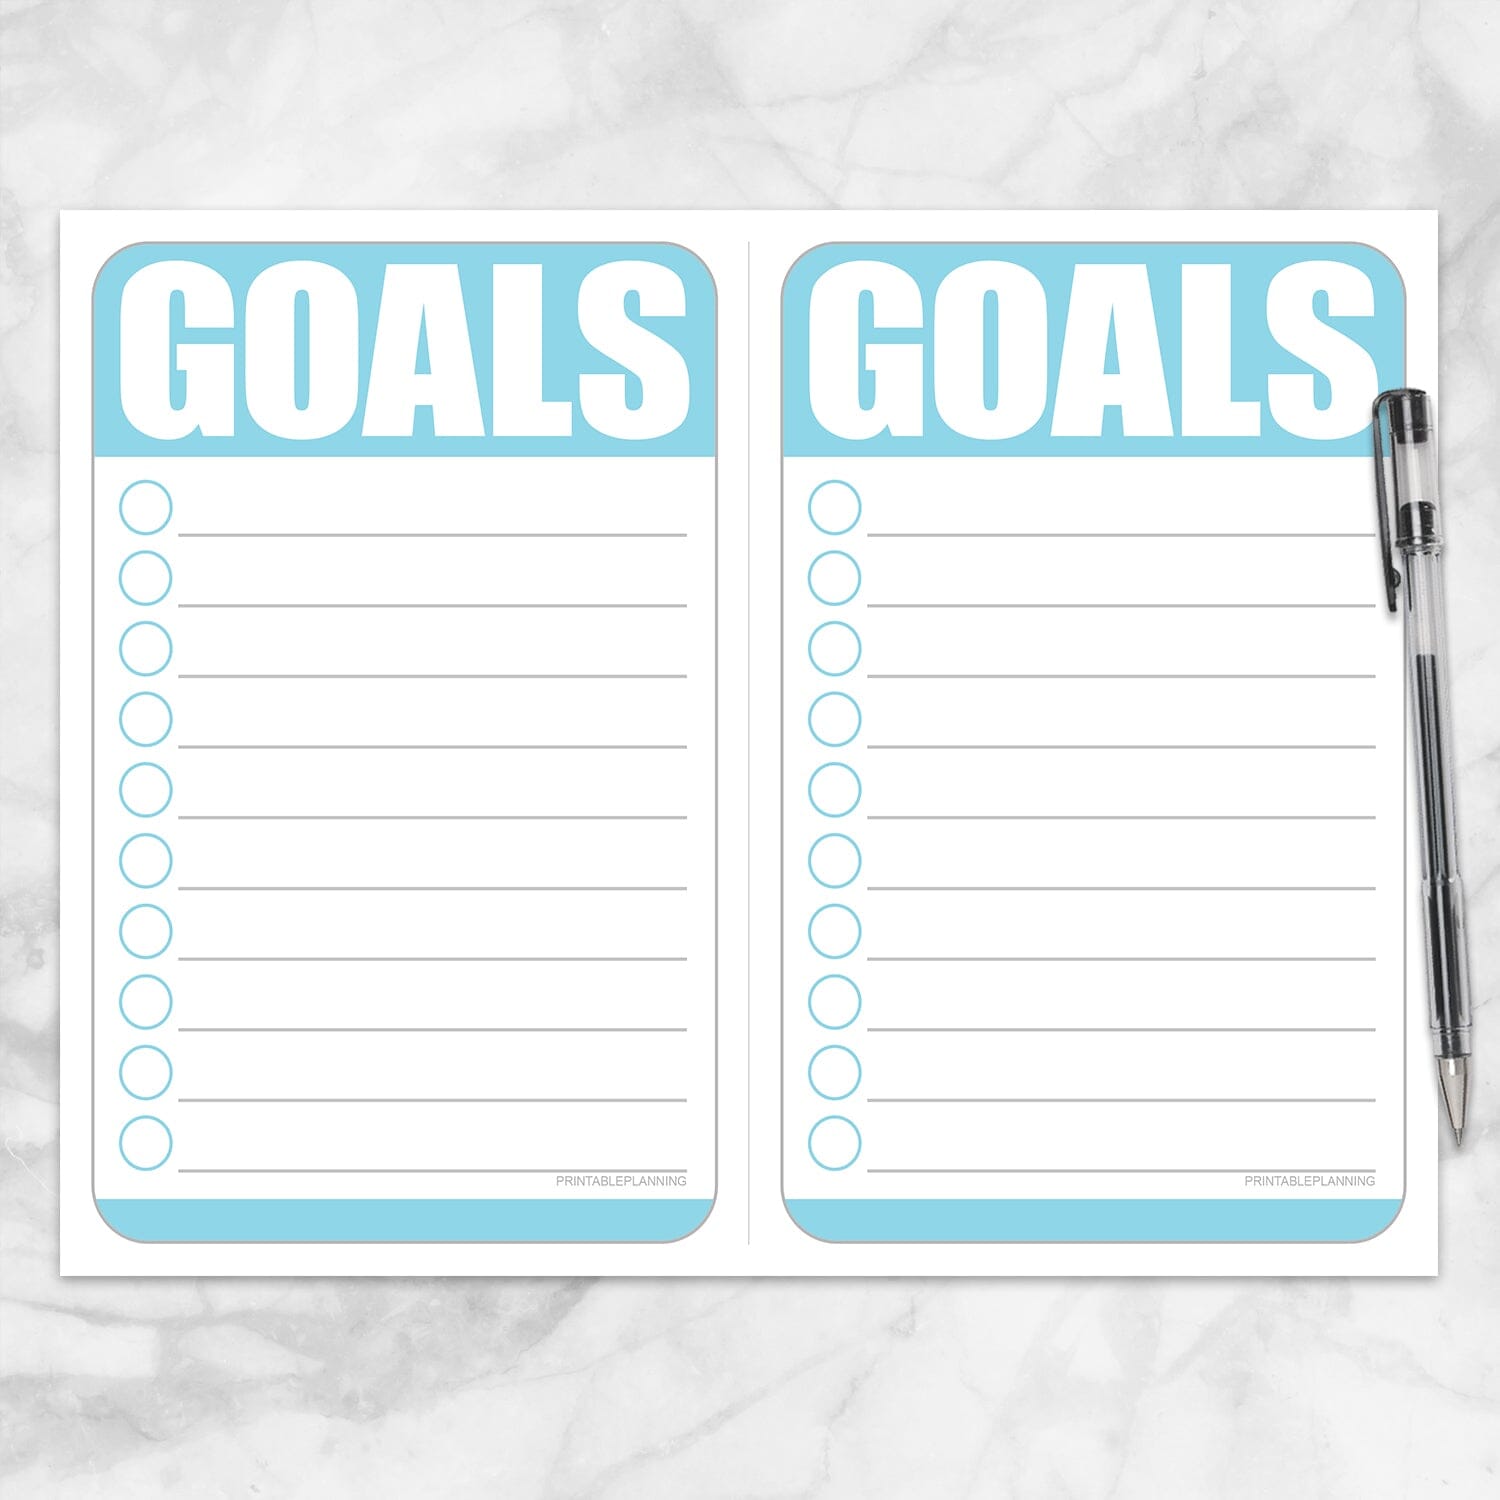 Printable Goals - Blue Sheet of two Half Page Checklists at Printable Planning.